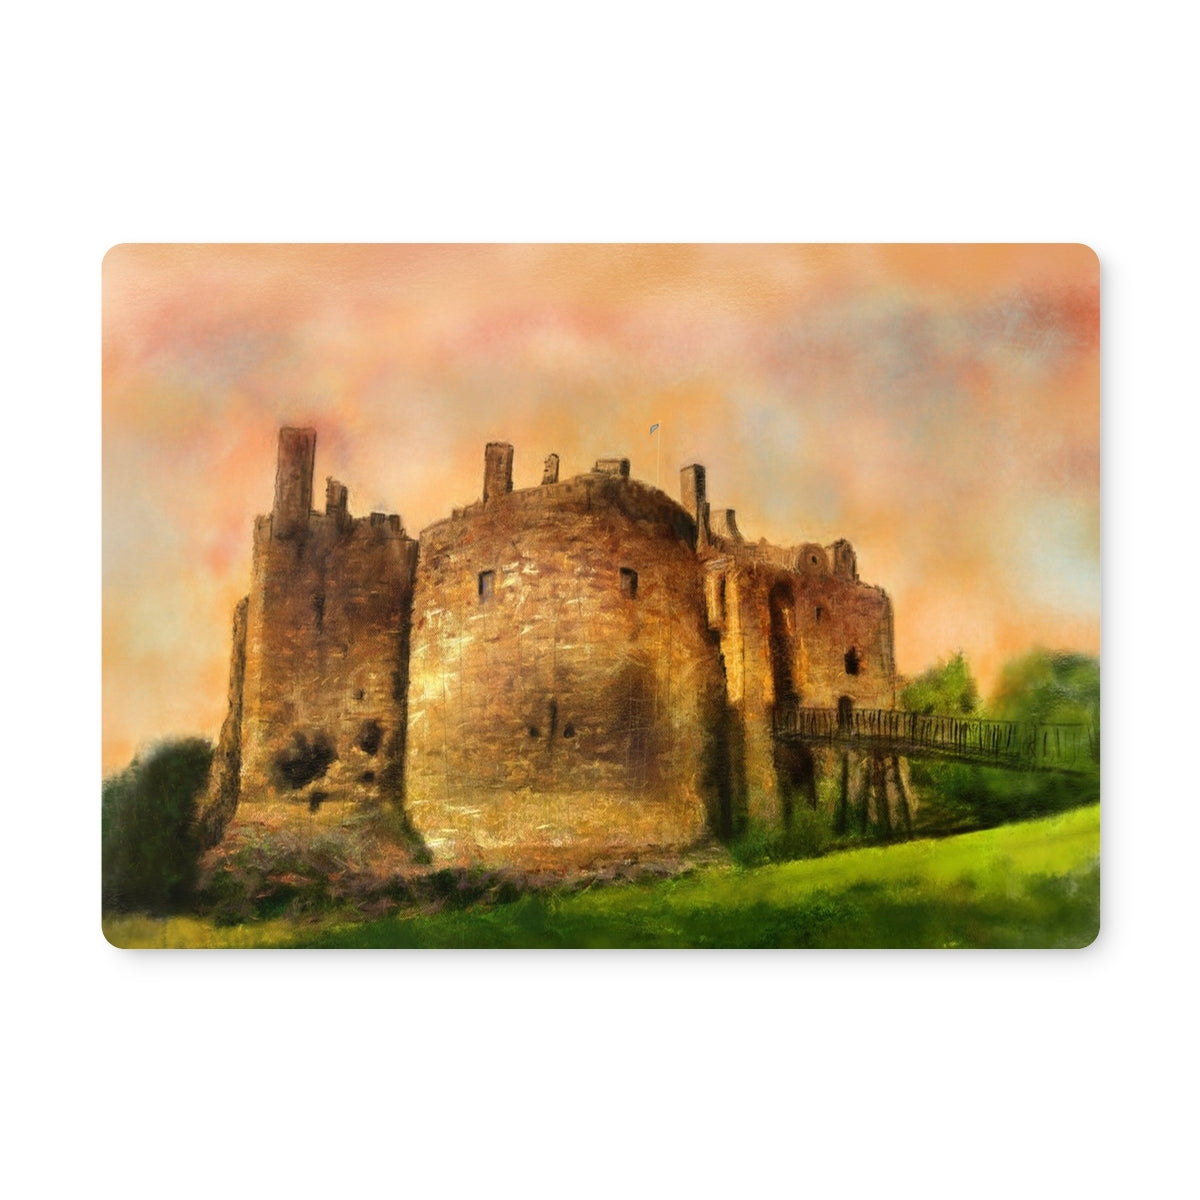 Dirleton Castle Art Gifts Placemat-Placemats-Historic & Iconic Scotland Art Gallery-2 Placemats-Paintings, Prints, Homeware, Art Gifts From Scotland By Scottish Artist Kevin Hunter